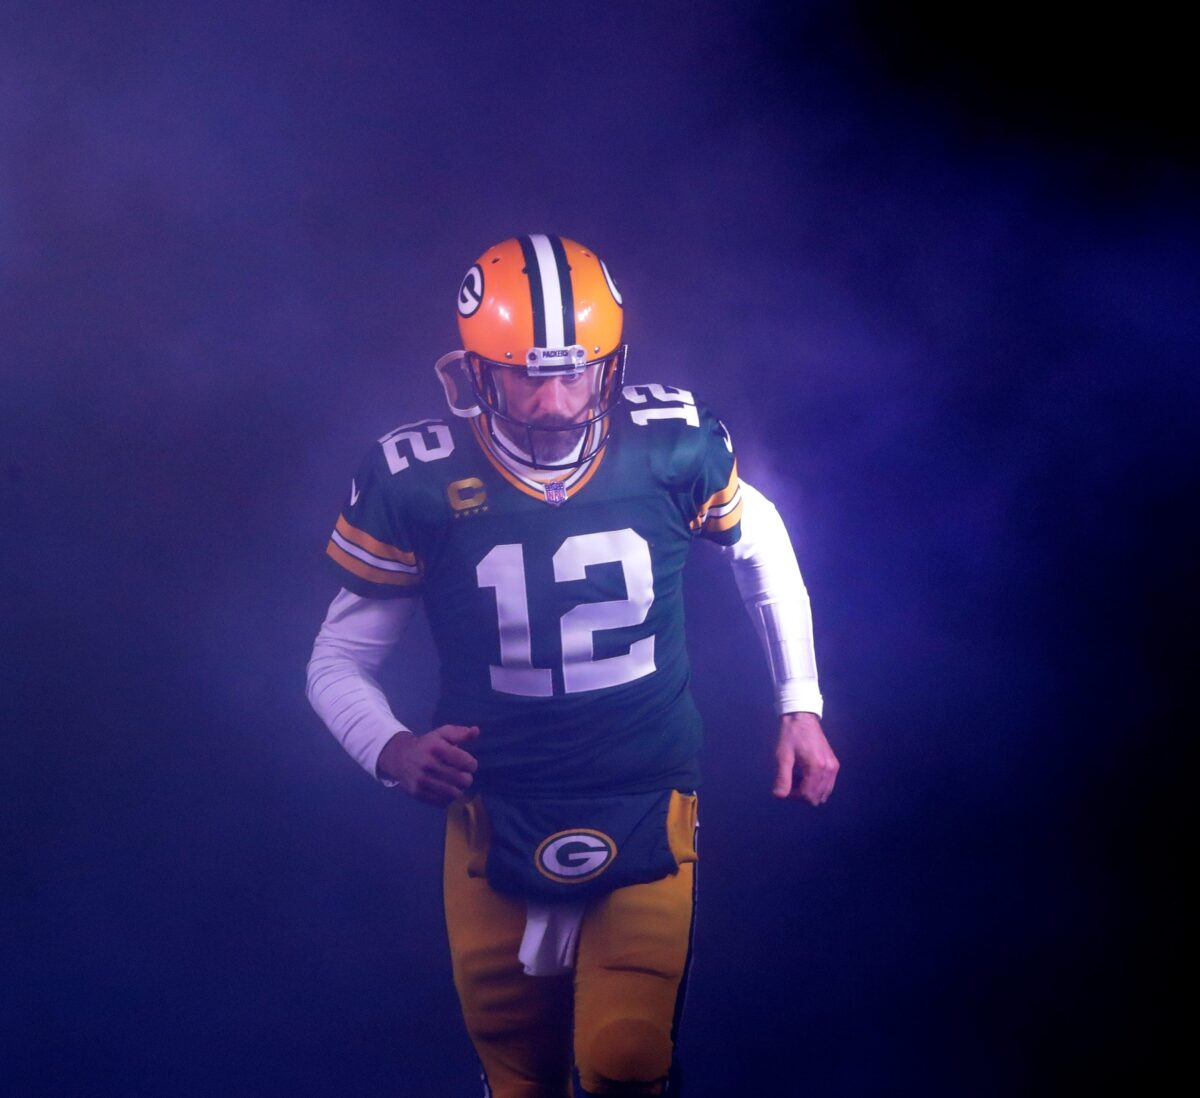 Where will Aaron Rodgers play in 2023?